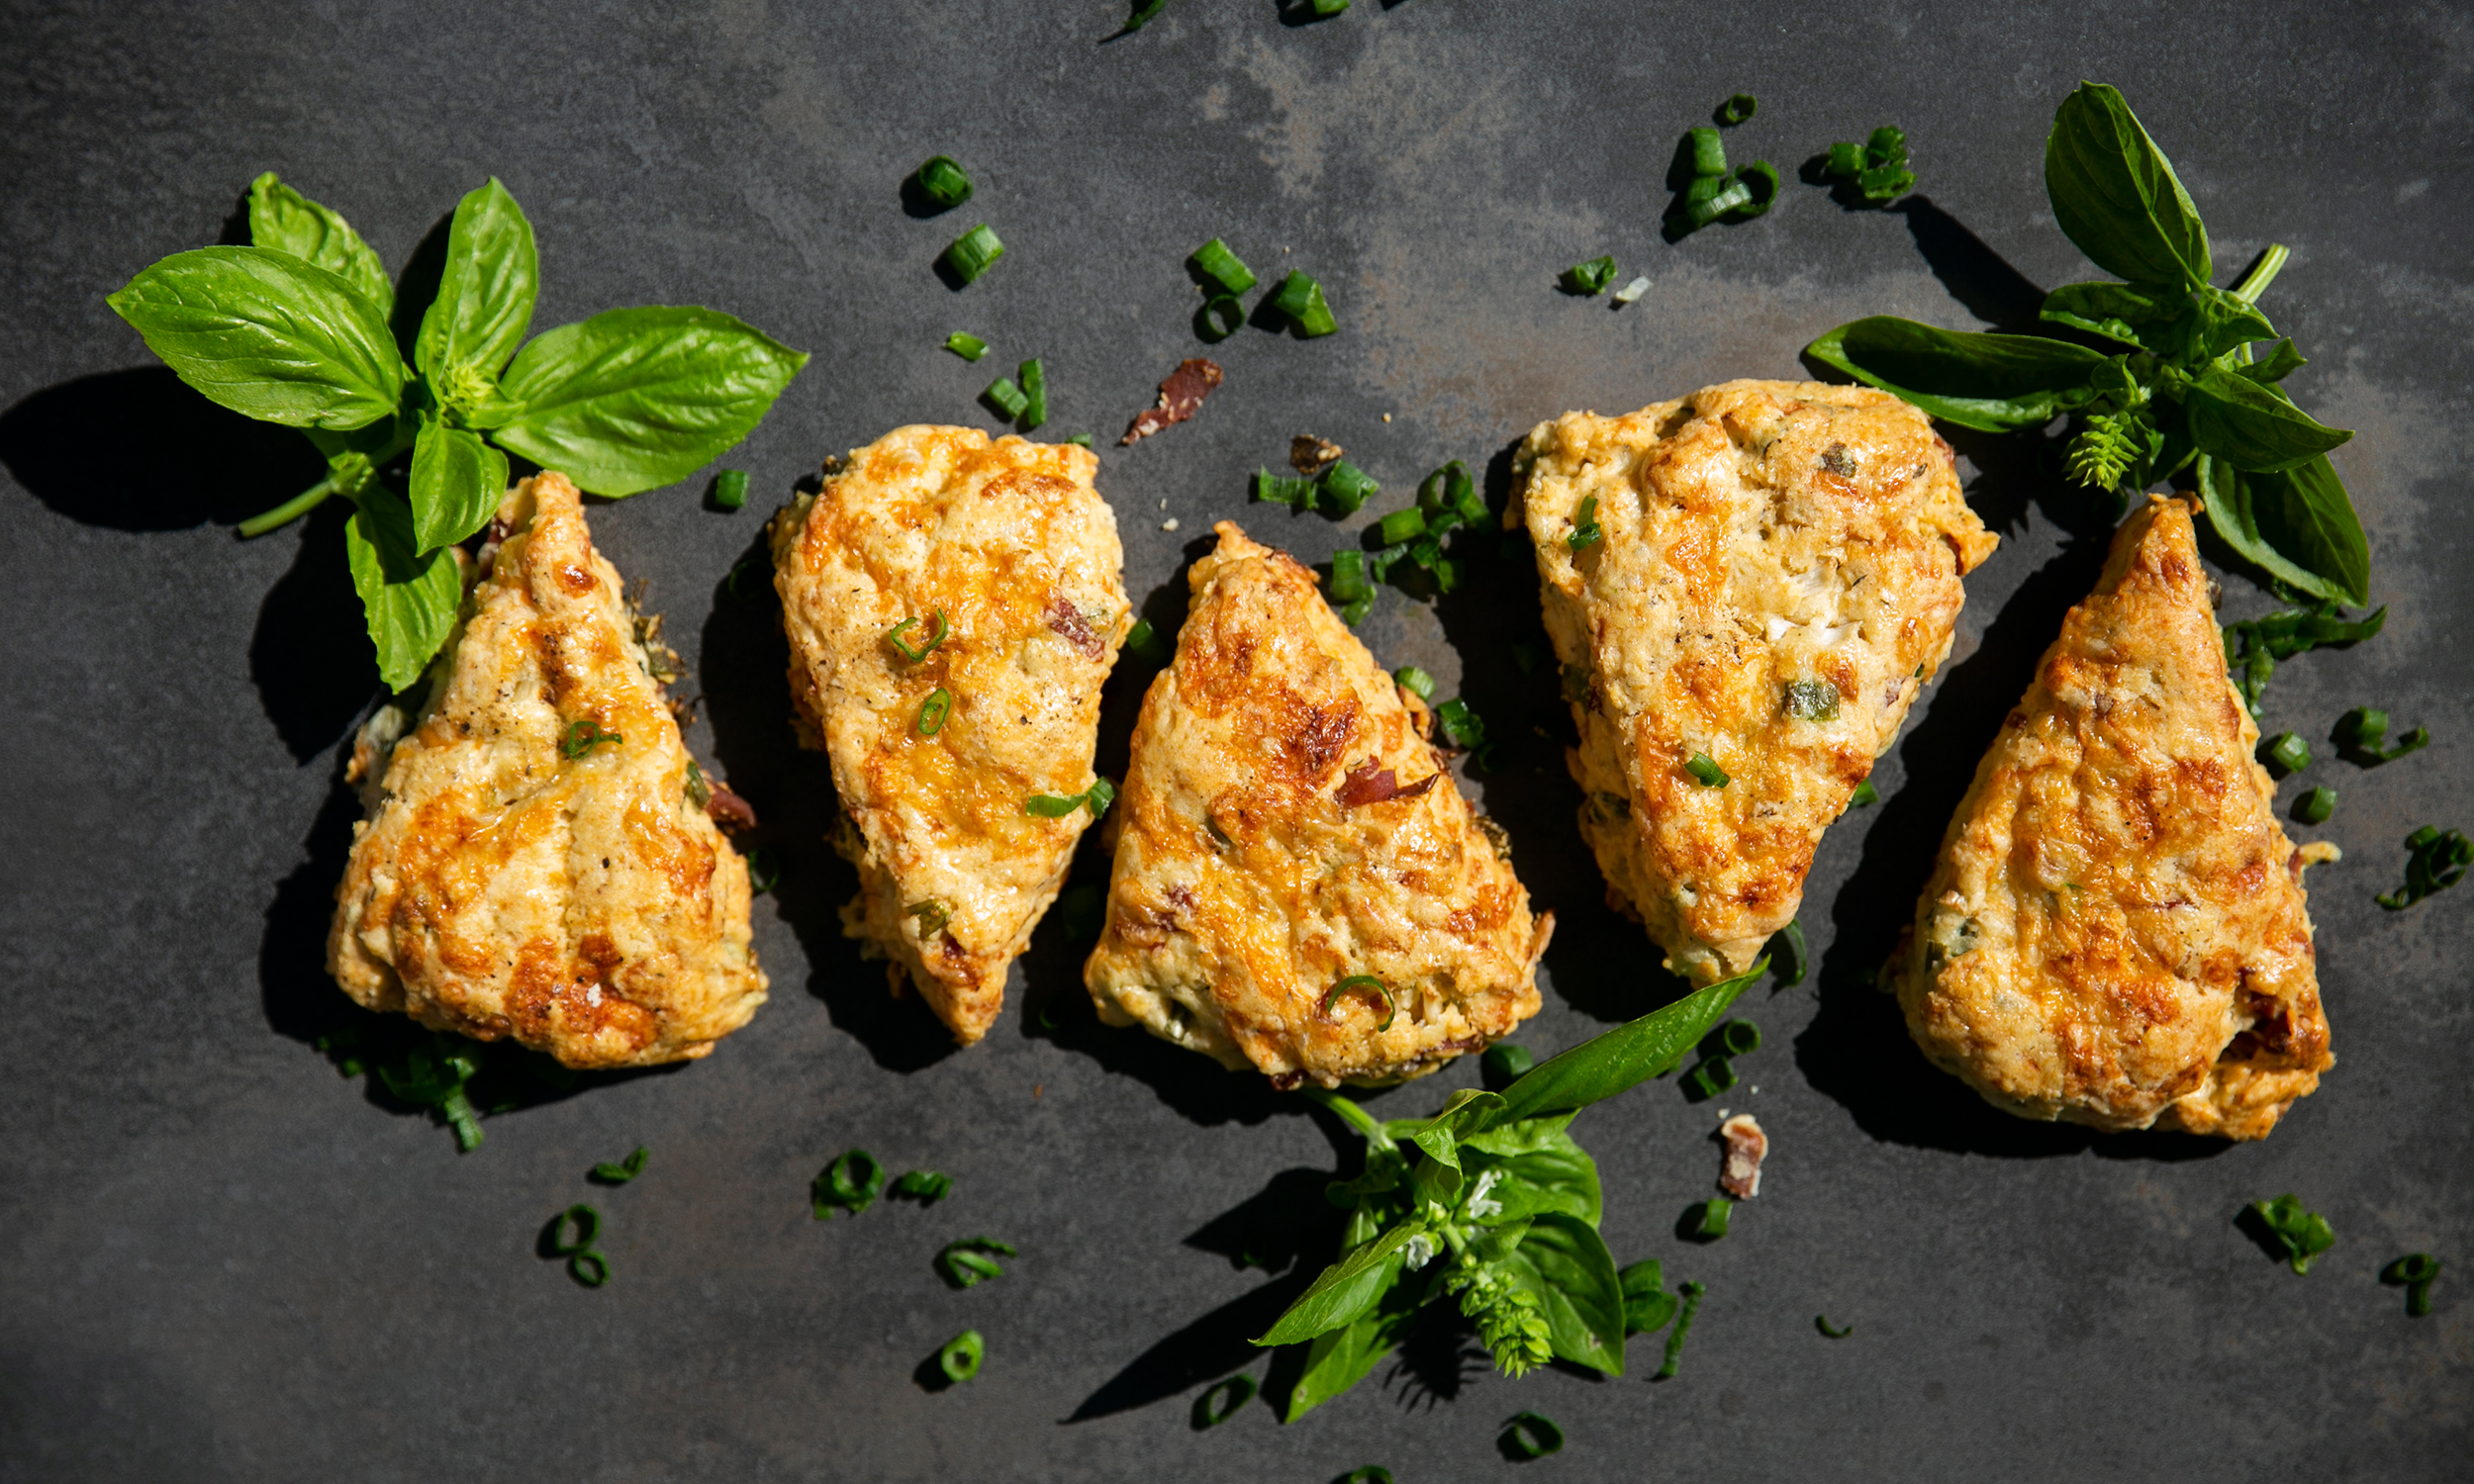 Make Bacon, Cheddar & Chive Scones This Valentine’s Day